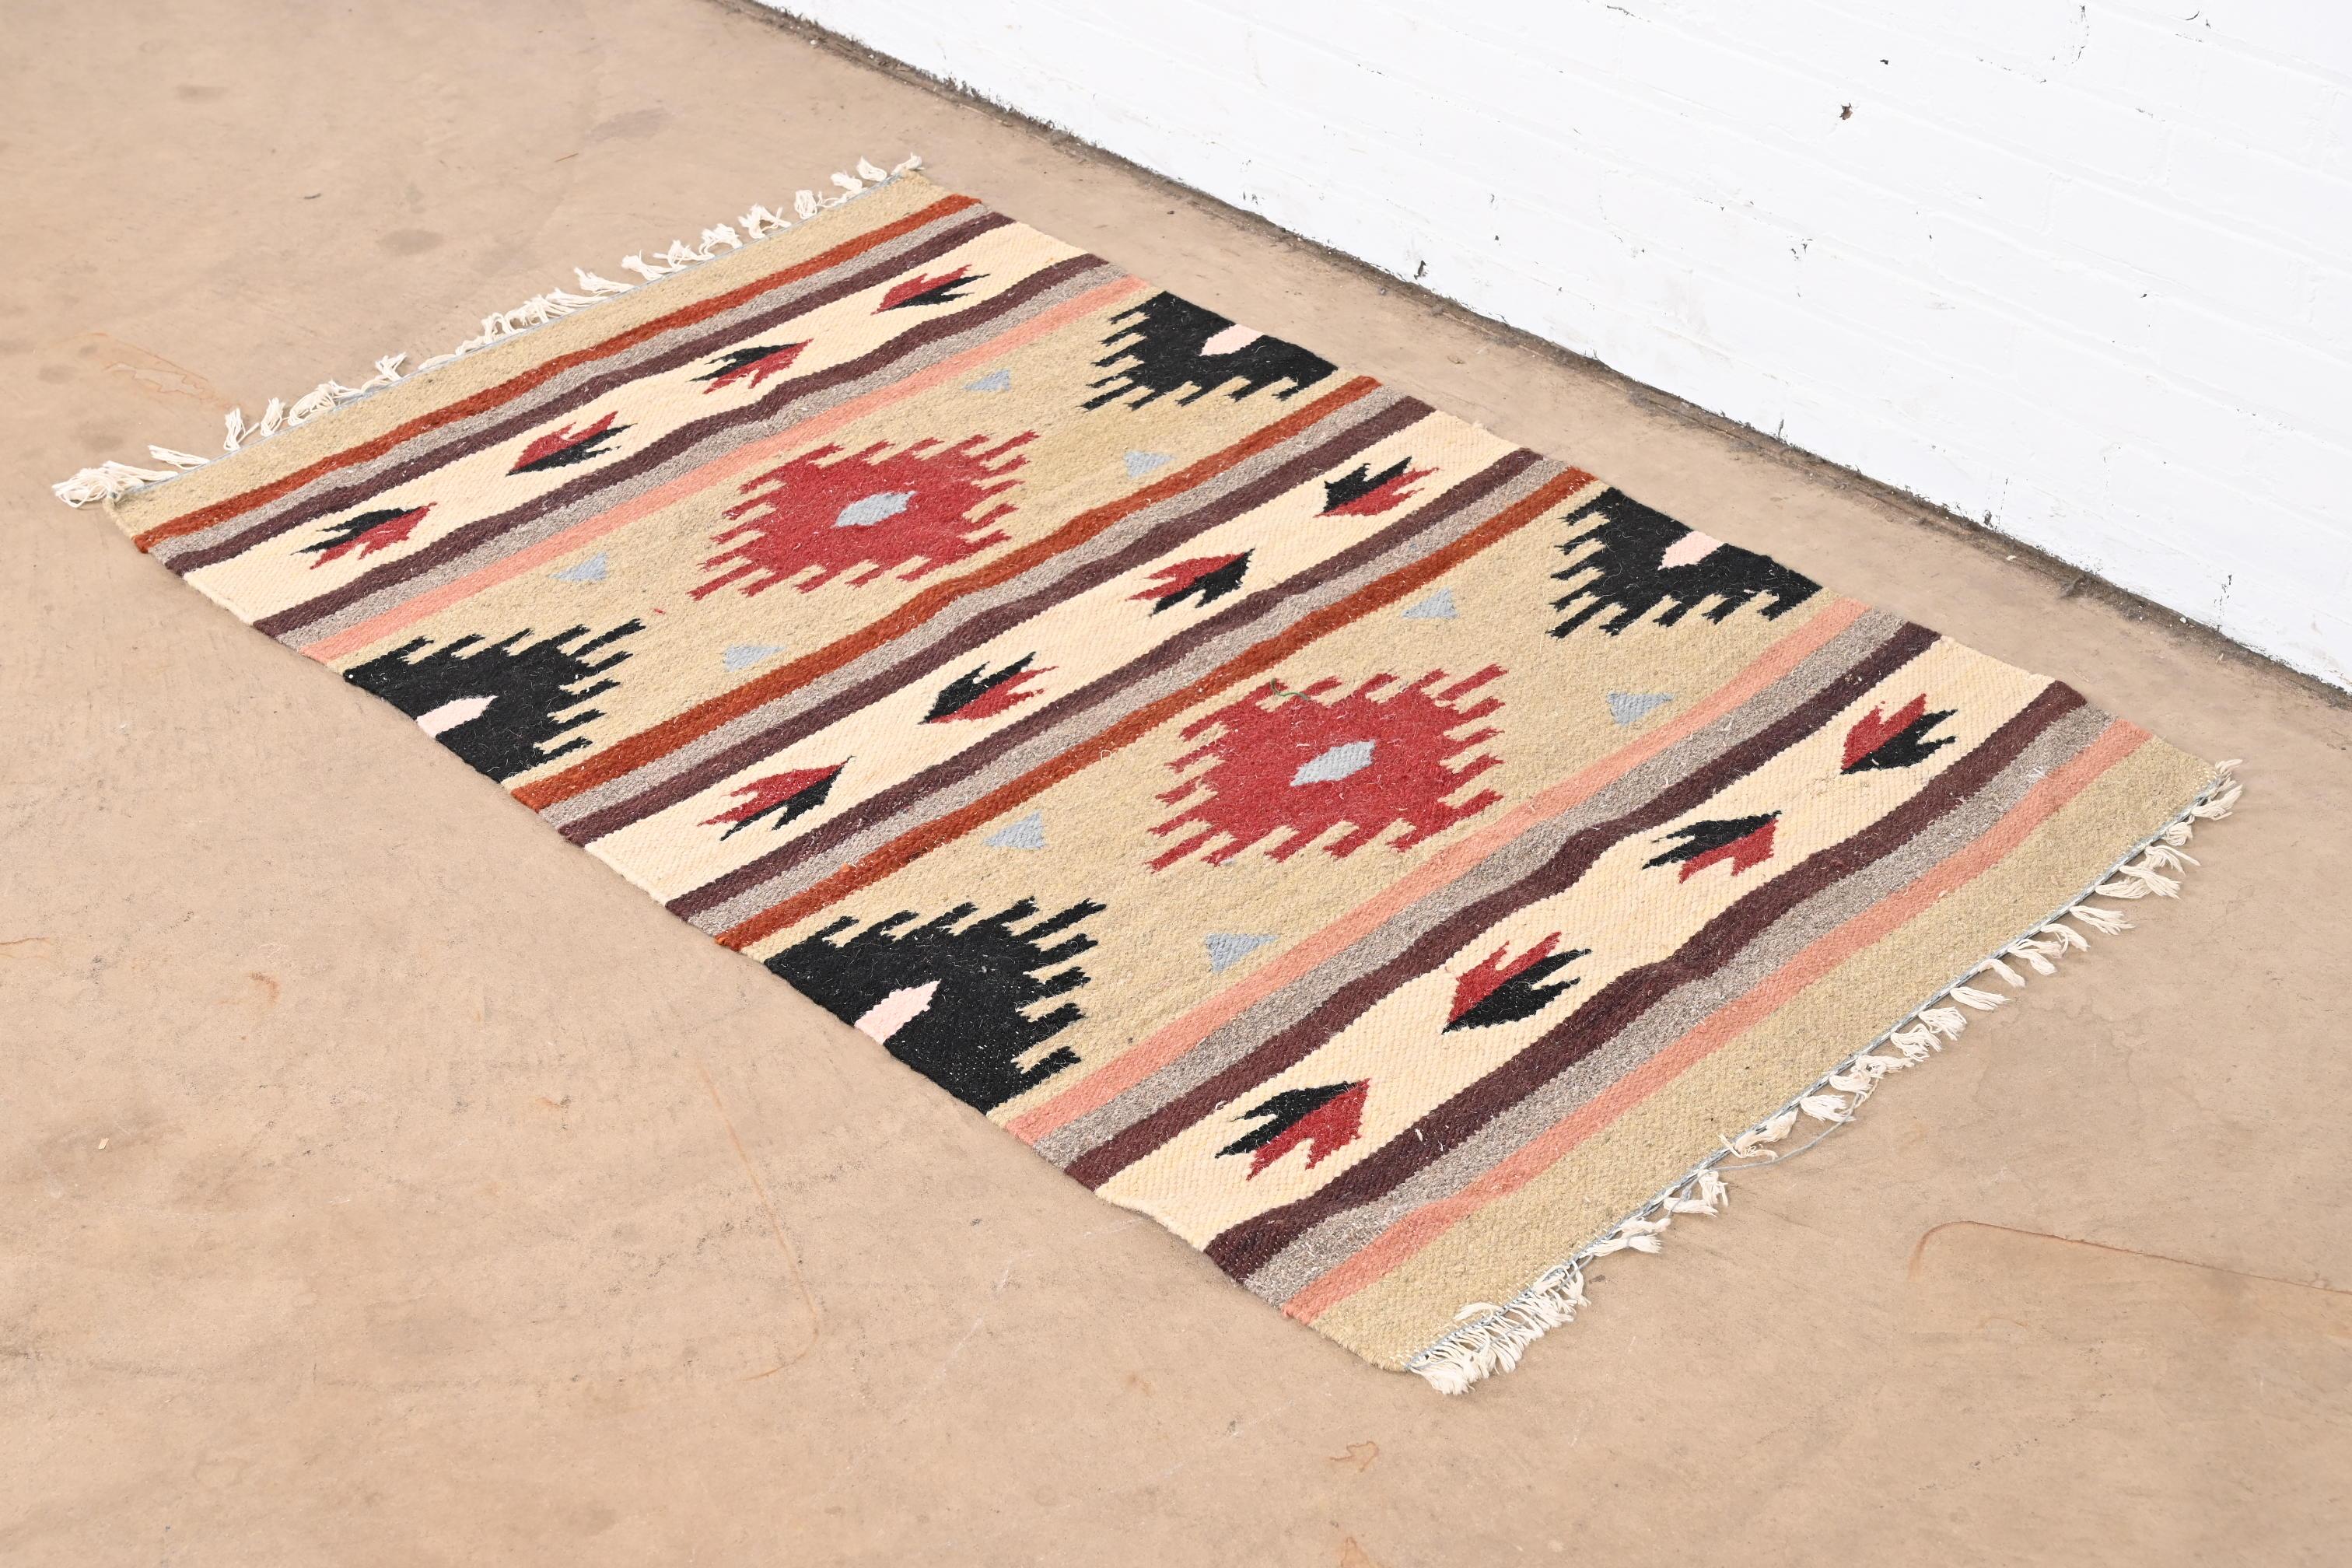 A gorgeous vintage Southwest Navajo style flat weave rug

Late 20th century

Colorful and vibrant geometric design, with predominant colors in tan, red, black, and brown.

Measures: 35.5